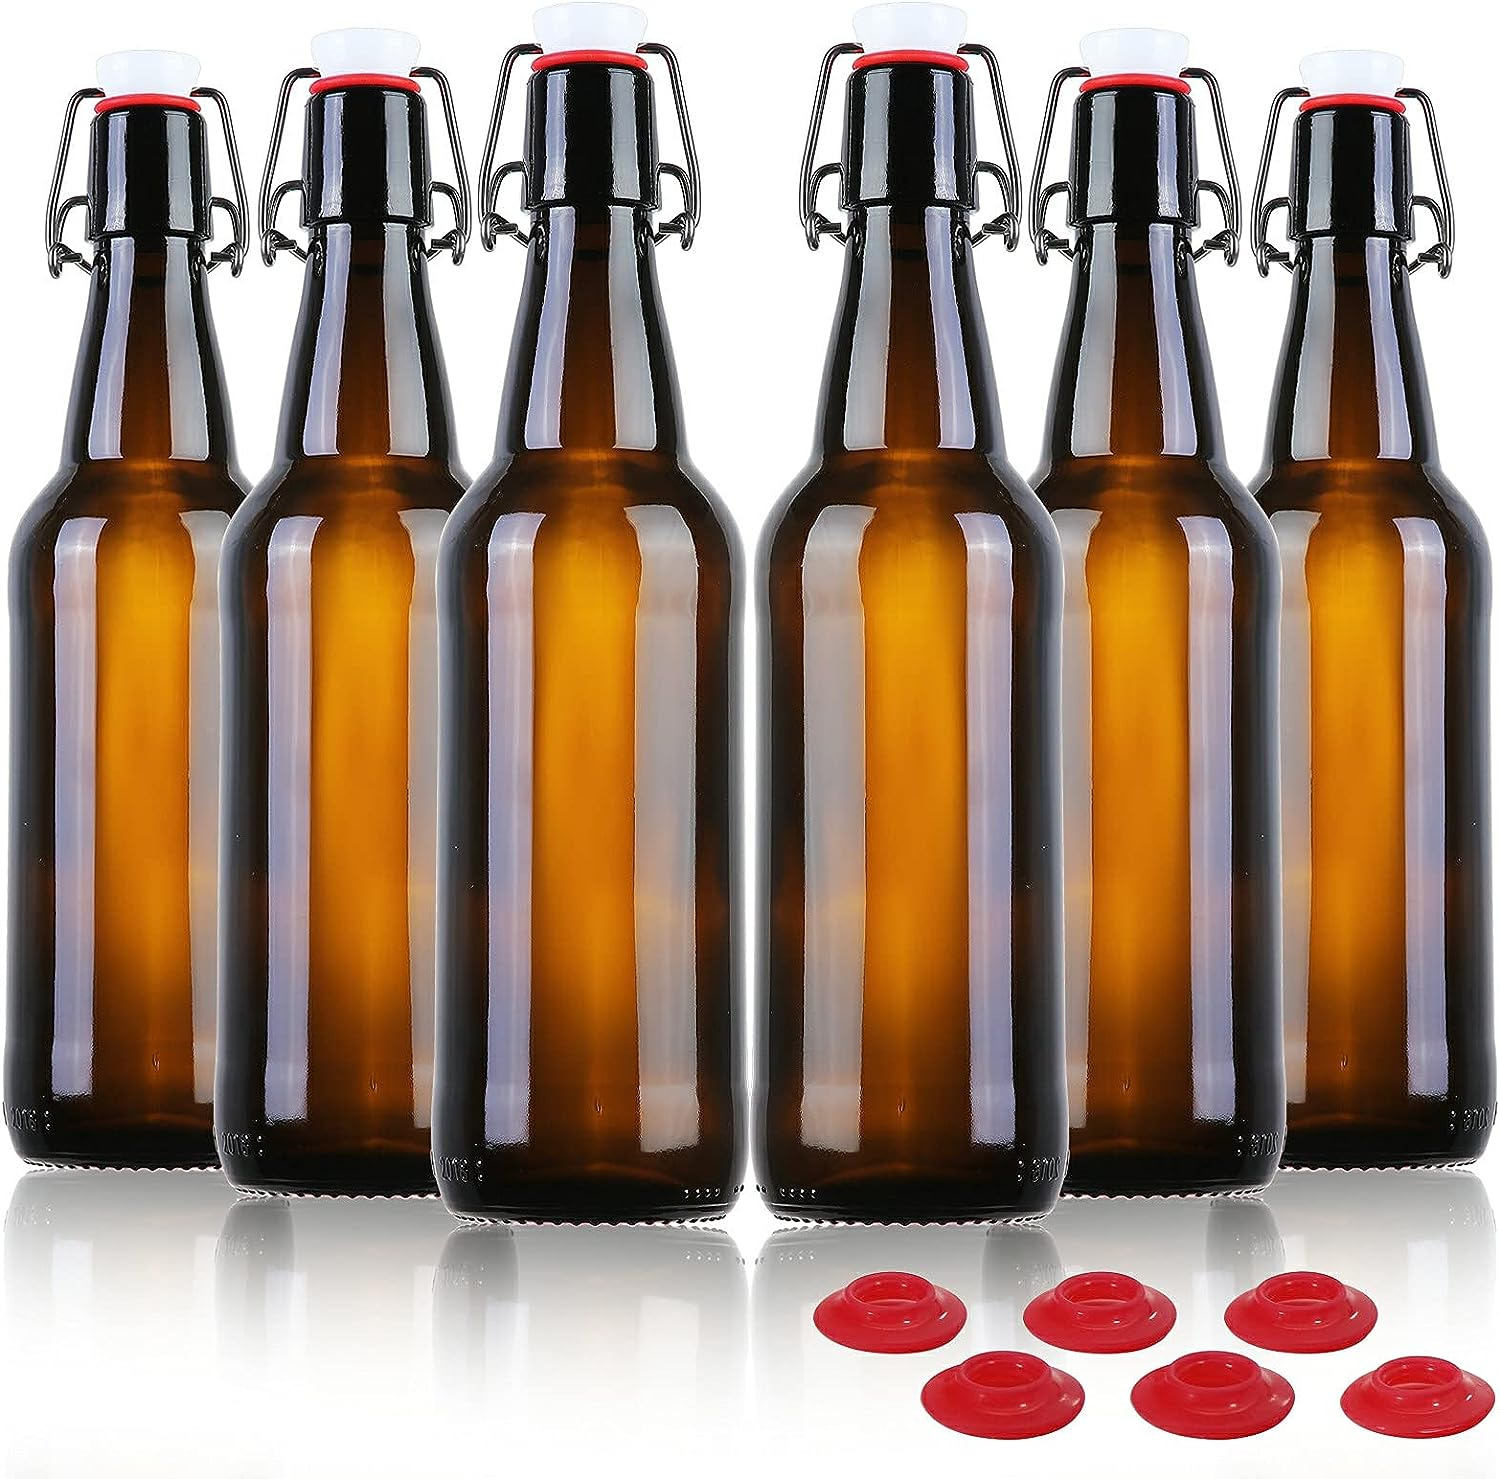 6 Pcs16 Oz Amber Glass Beer Bottles for Home Brewing with Flip Caps